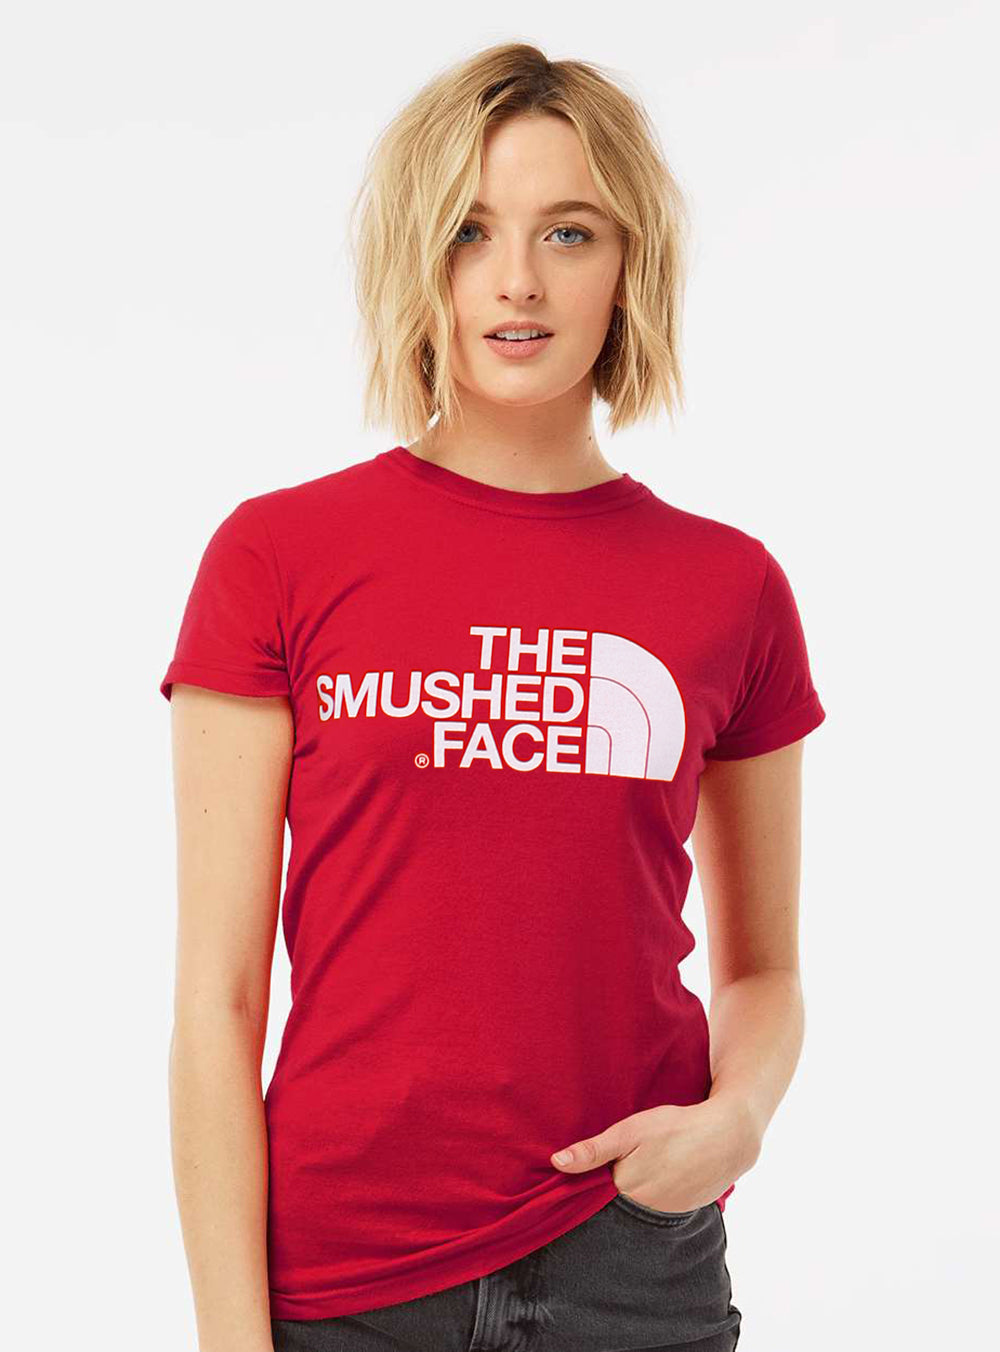 The Smushed Face Tee